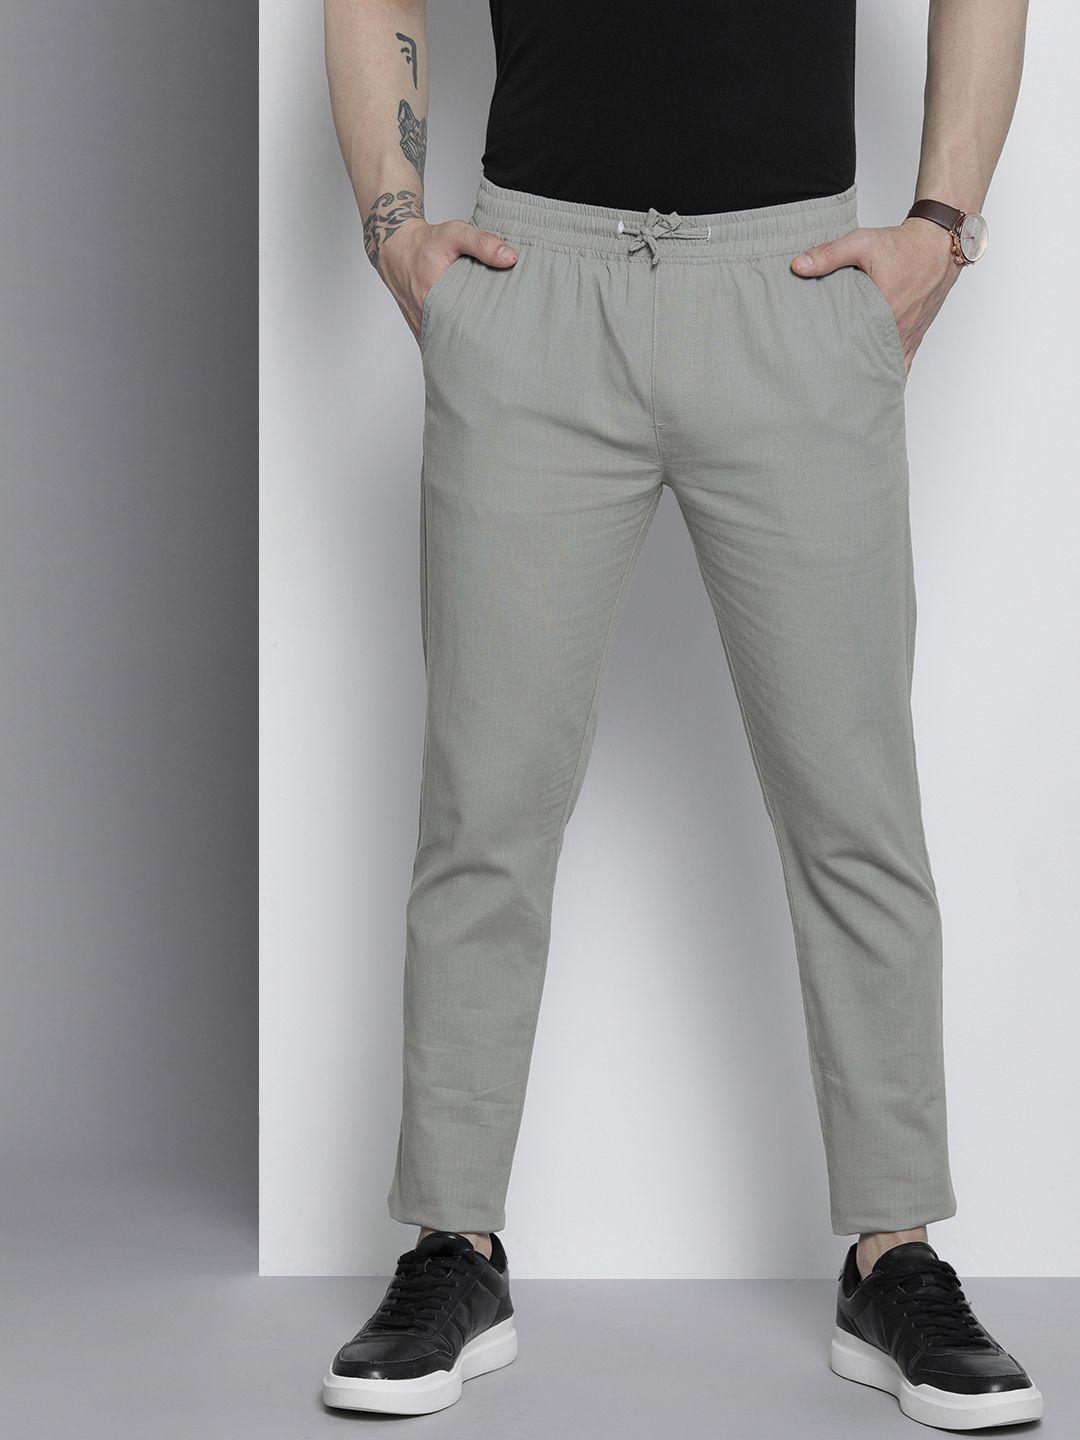 The Indian Garage Co Men Grey Slim Fit Cotton Trousers